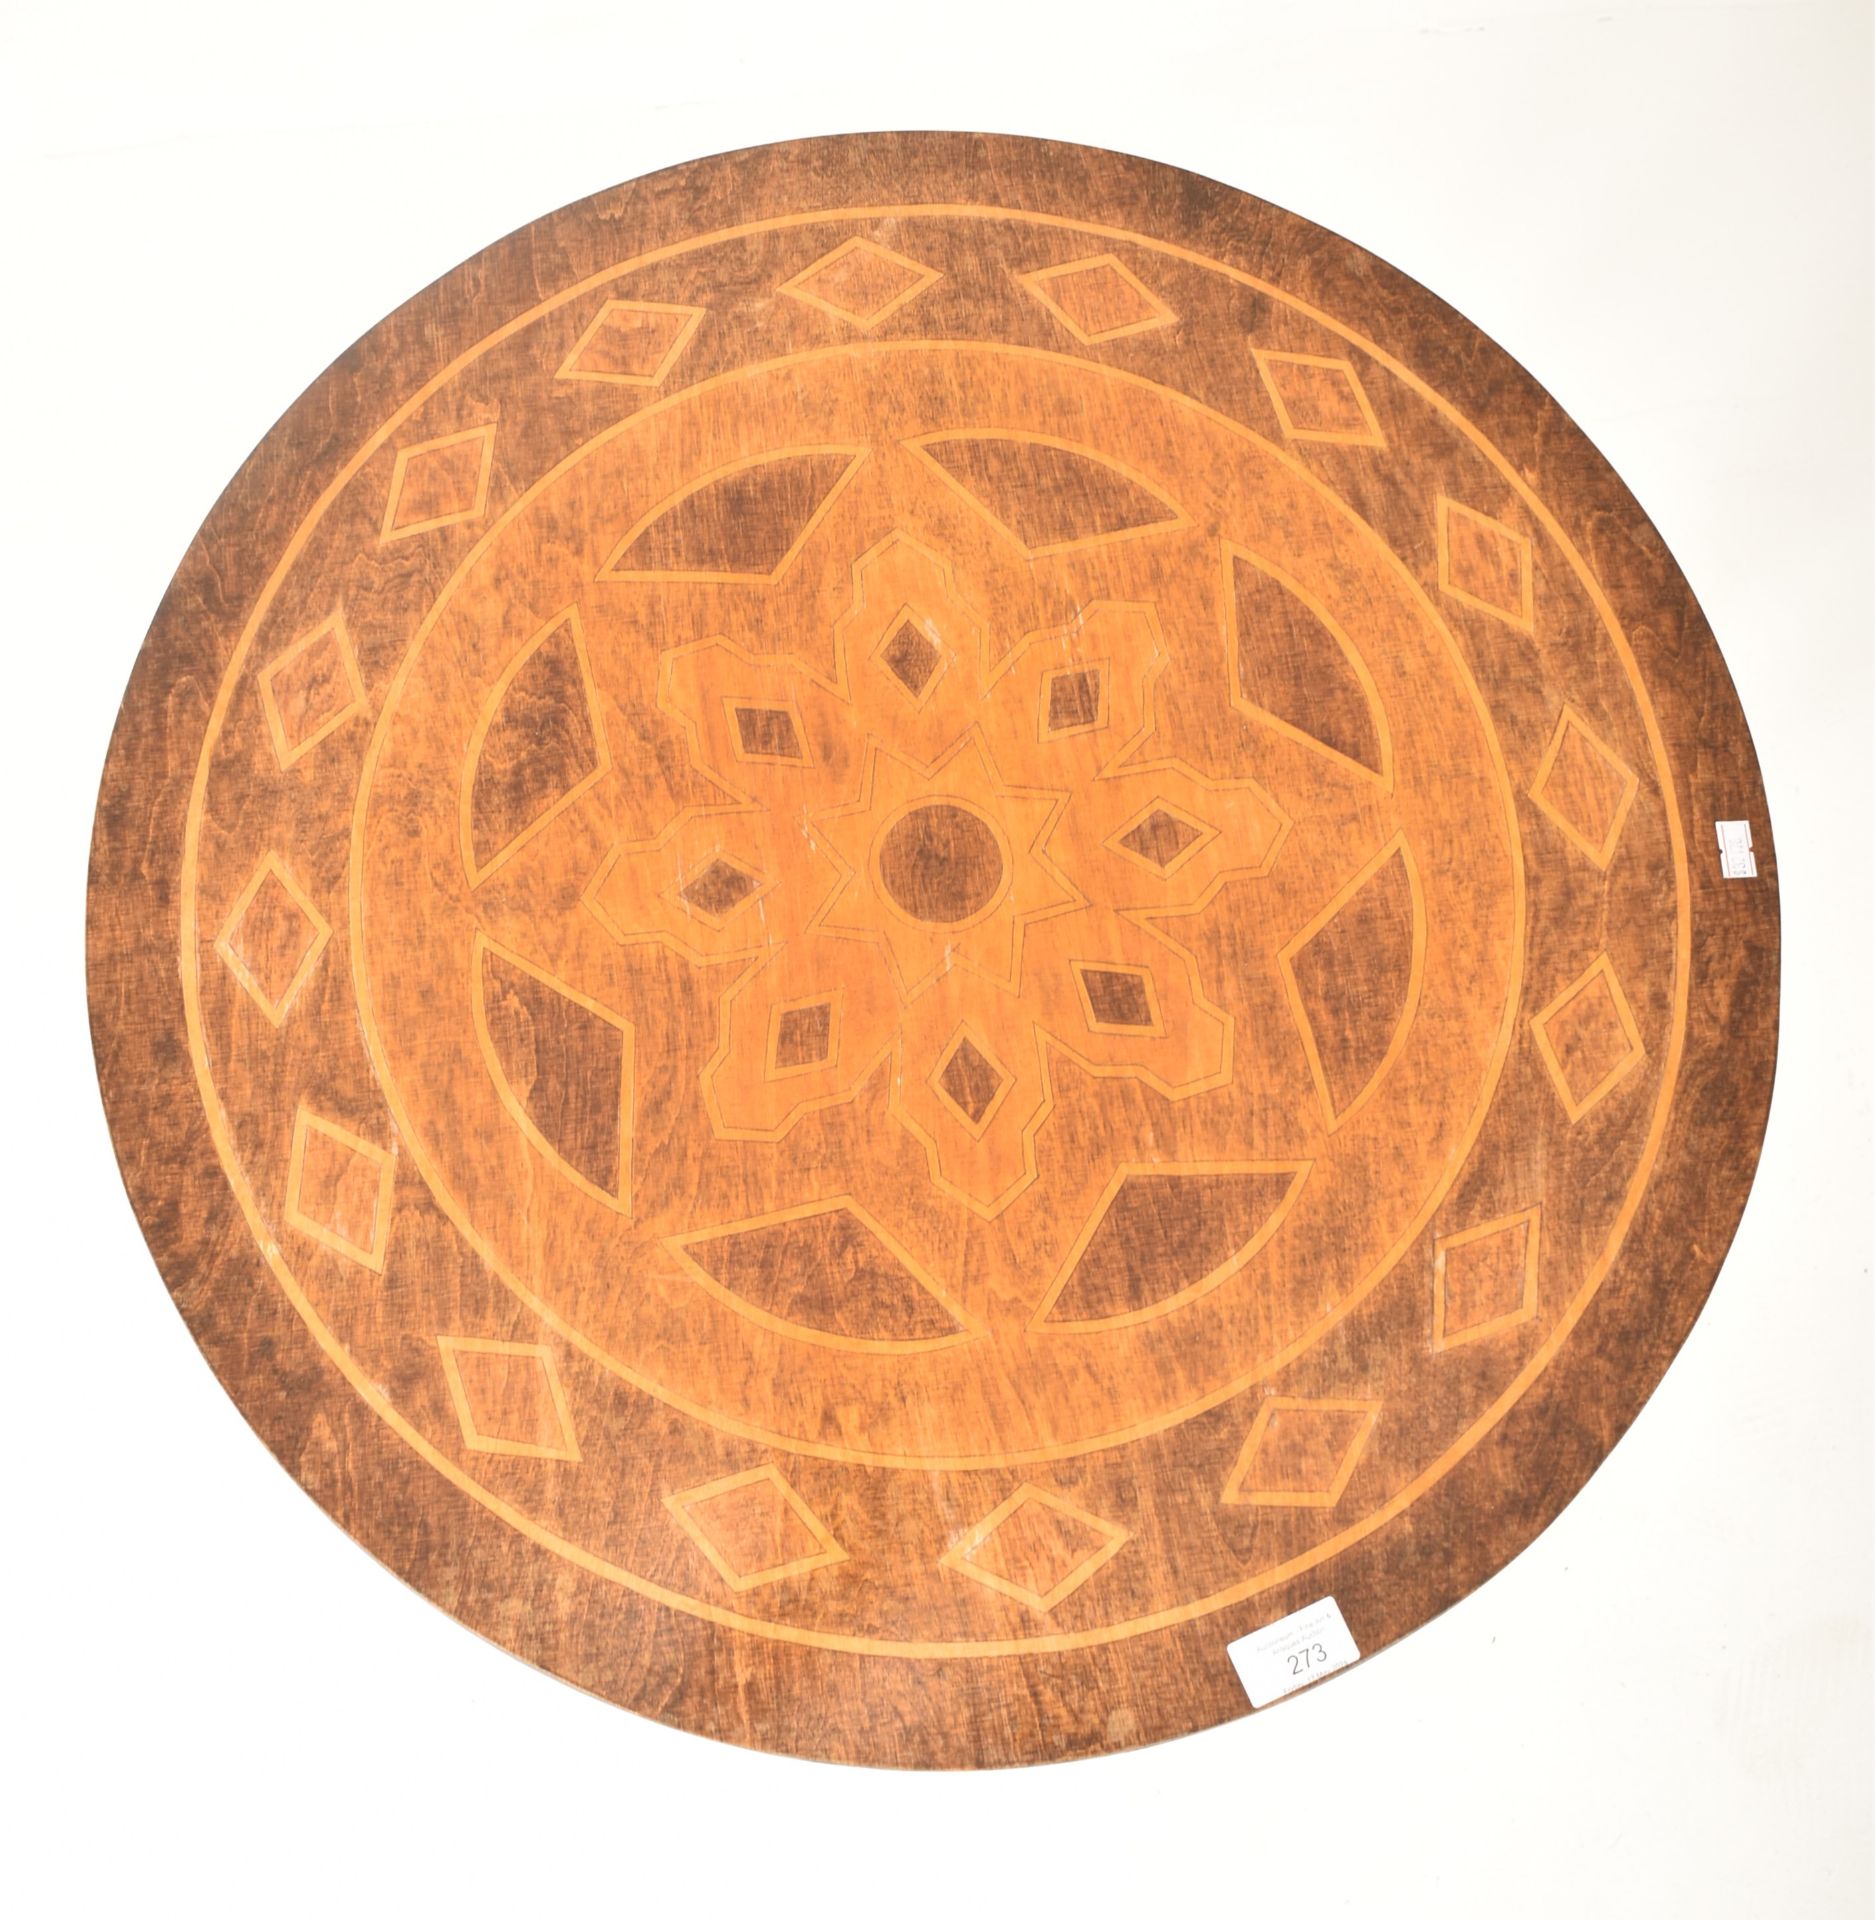 LATE 19TH CENTURY MAHOGANY & SATINWOOD MARQUETRY SIDE TABLE - Image 3 of 5